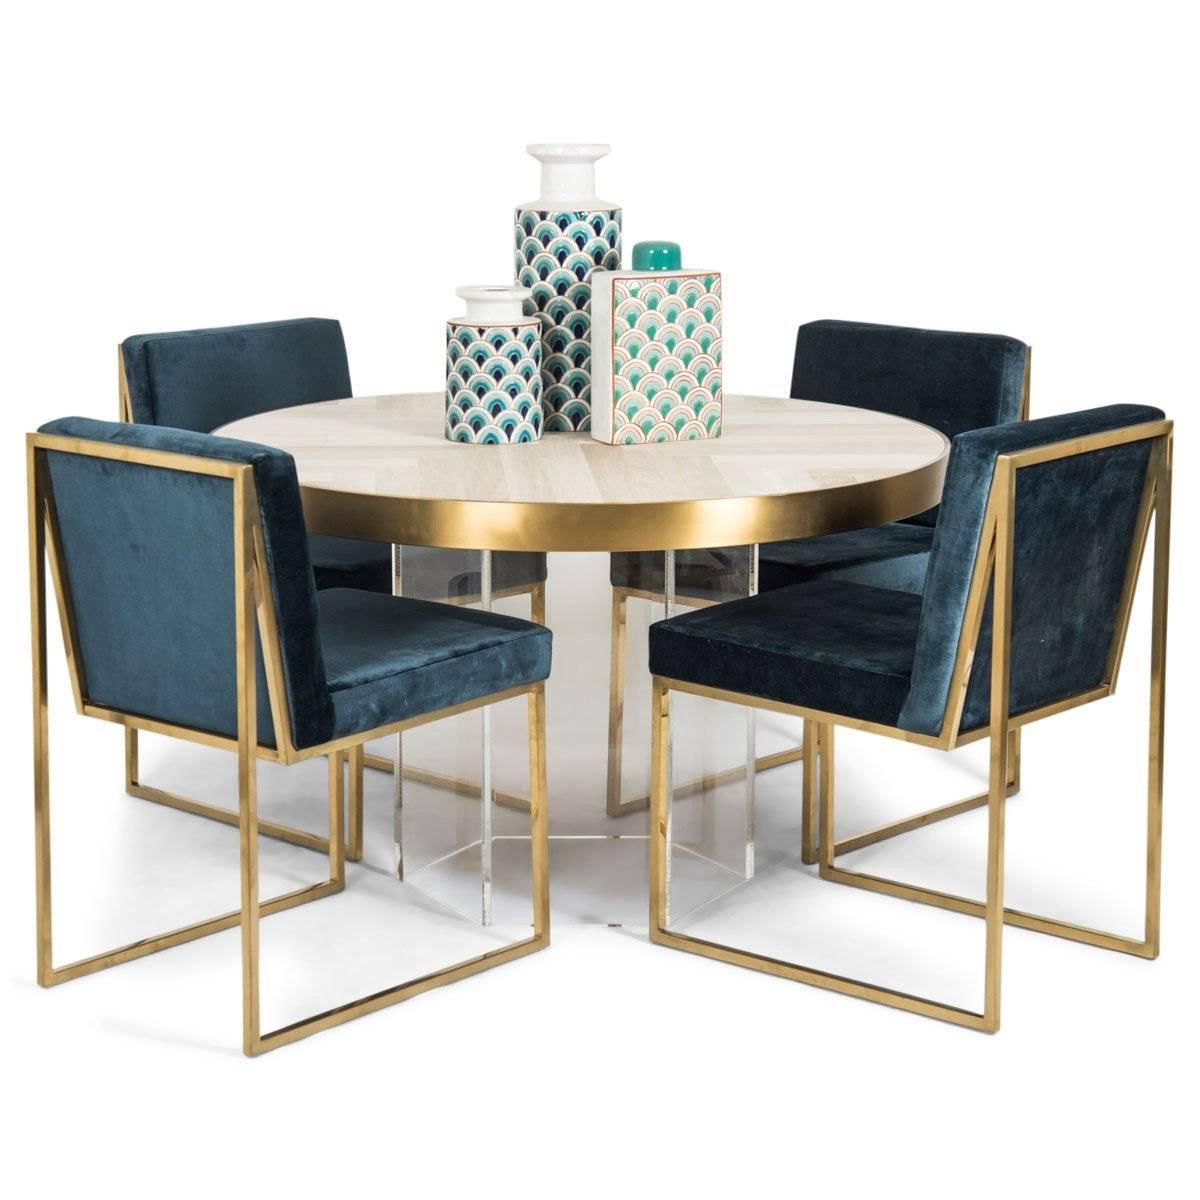 The Amalfi three round dining table is the perfect addition to our Amalfi collection.
Featuring a hexagon Lucite base and round walnut tabletop in our Classic Amalfi herringbone pattern.
Seats four comfortably. 

Dimensions:
48